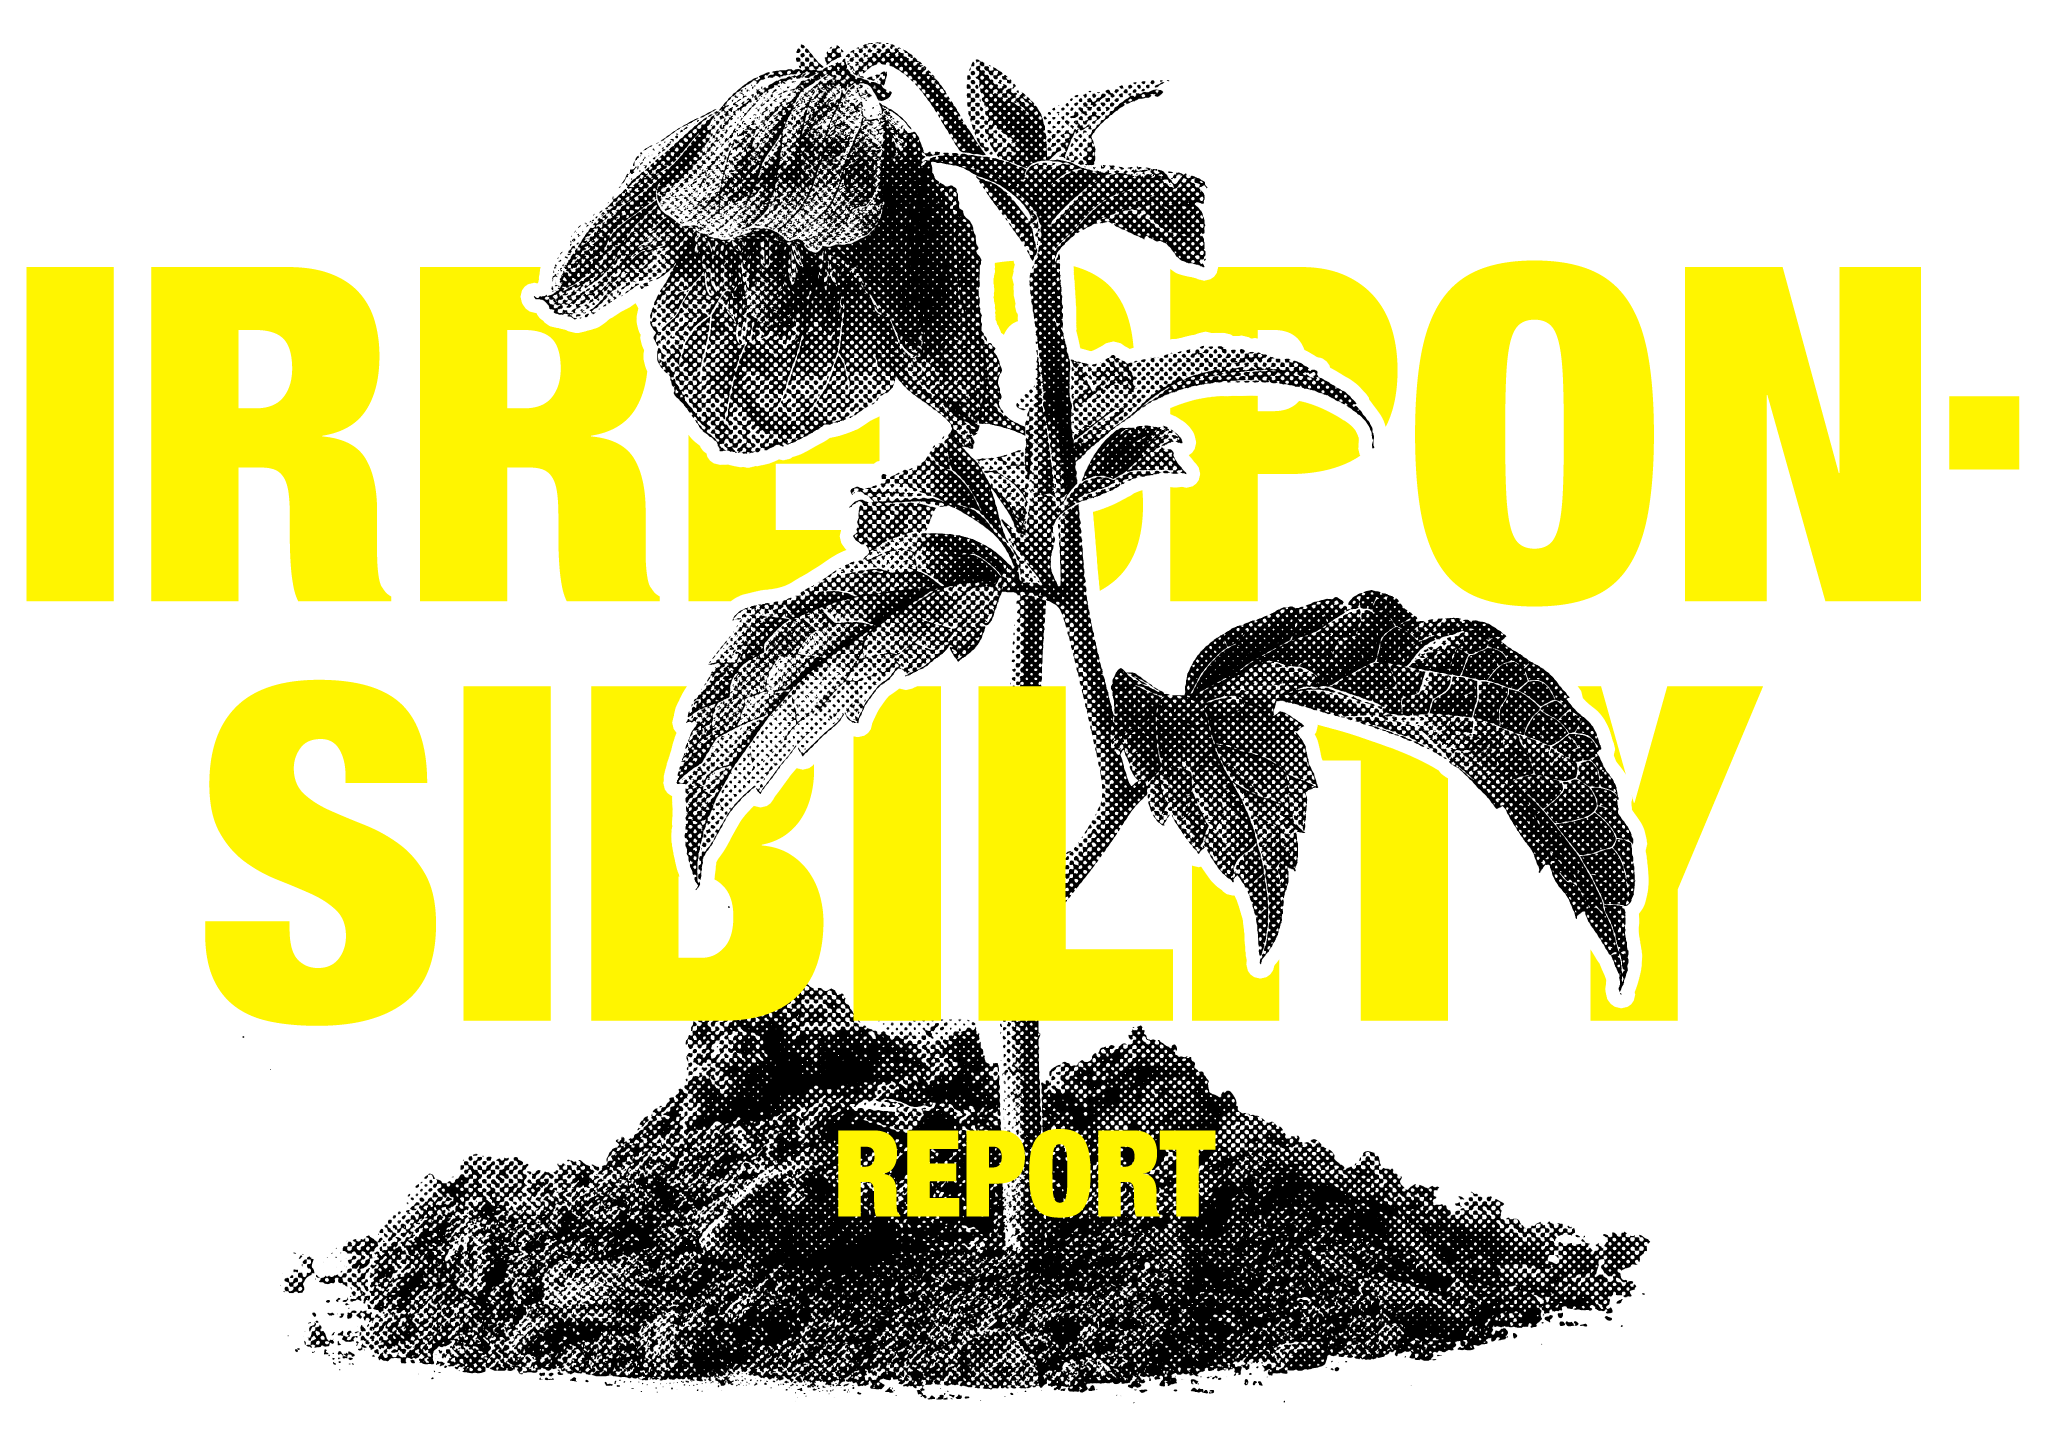 Image text reads 'Irresponsibility Report' with an overlay image of a flower in front of the text graphic